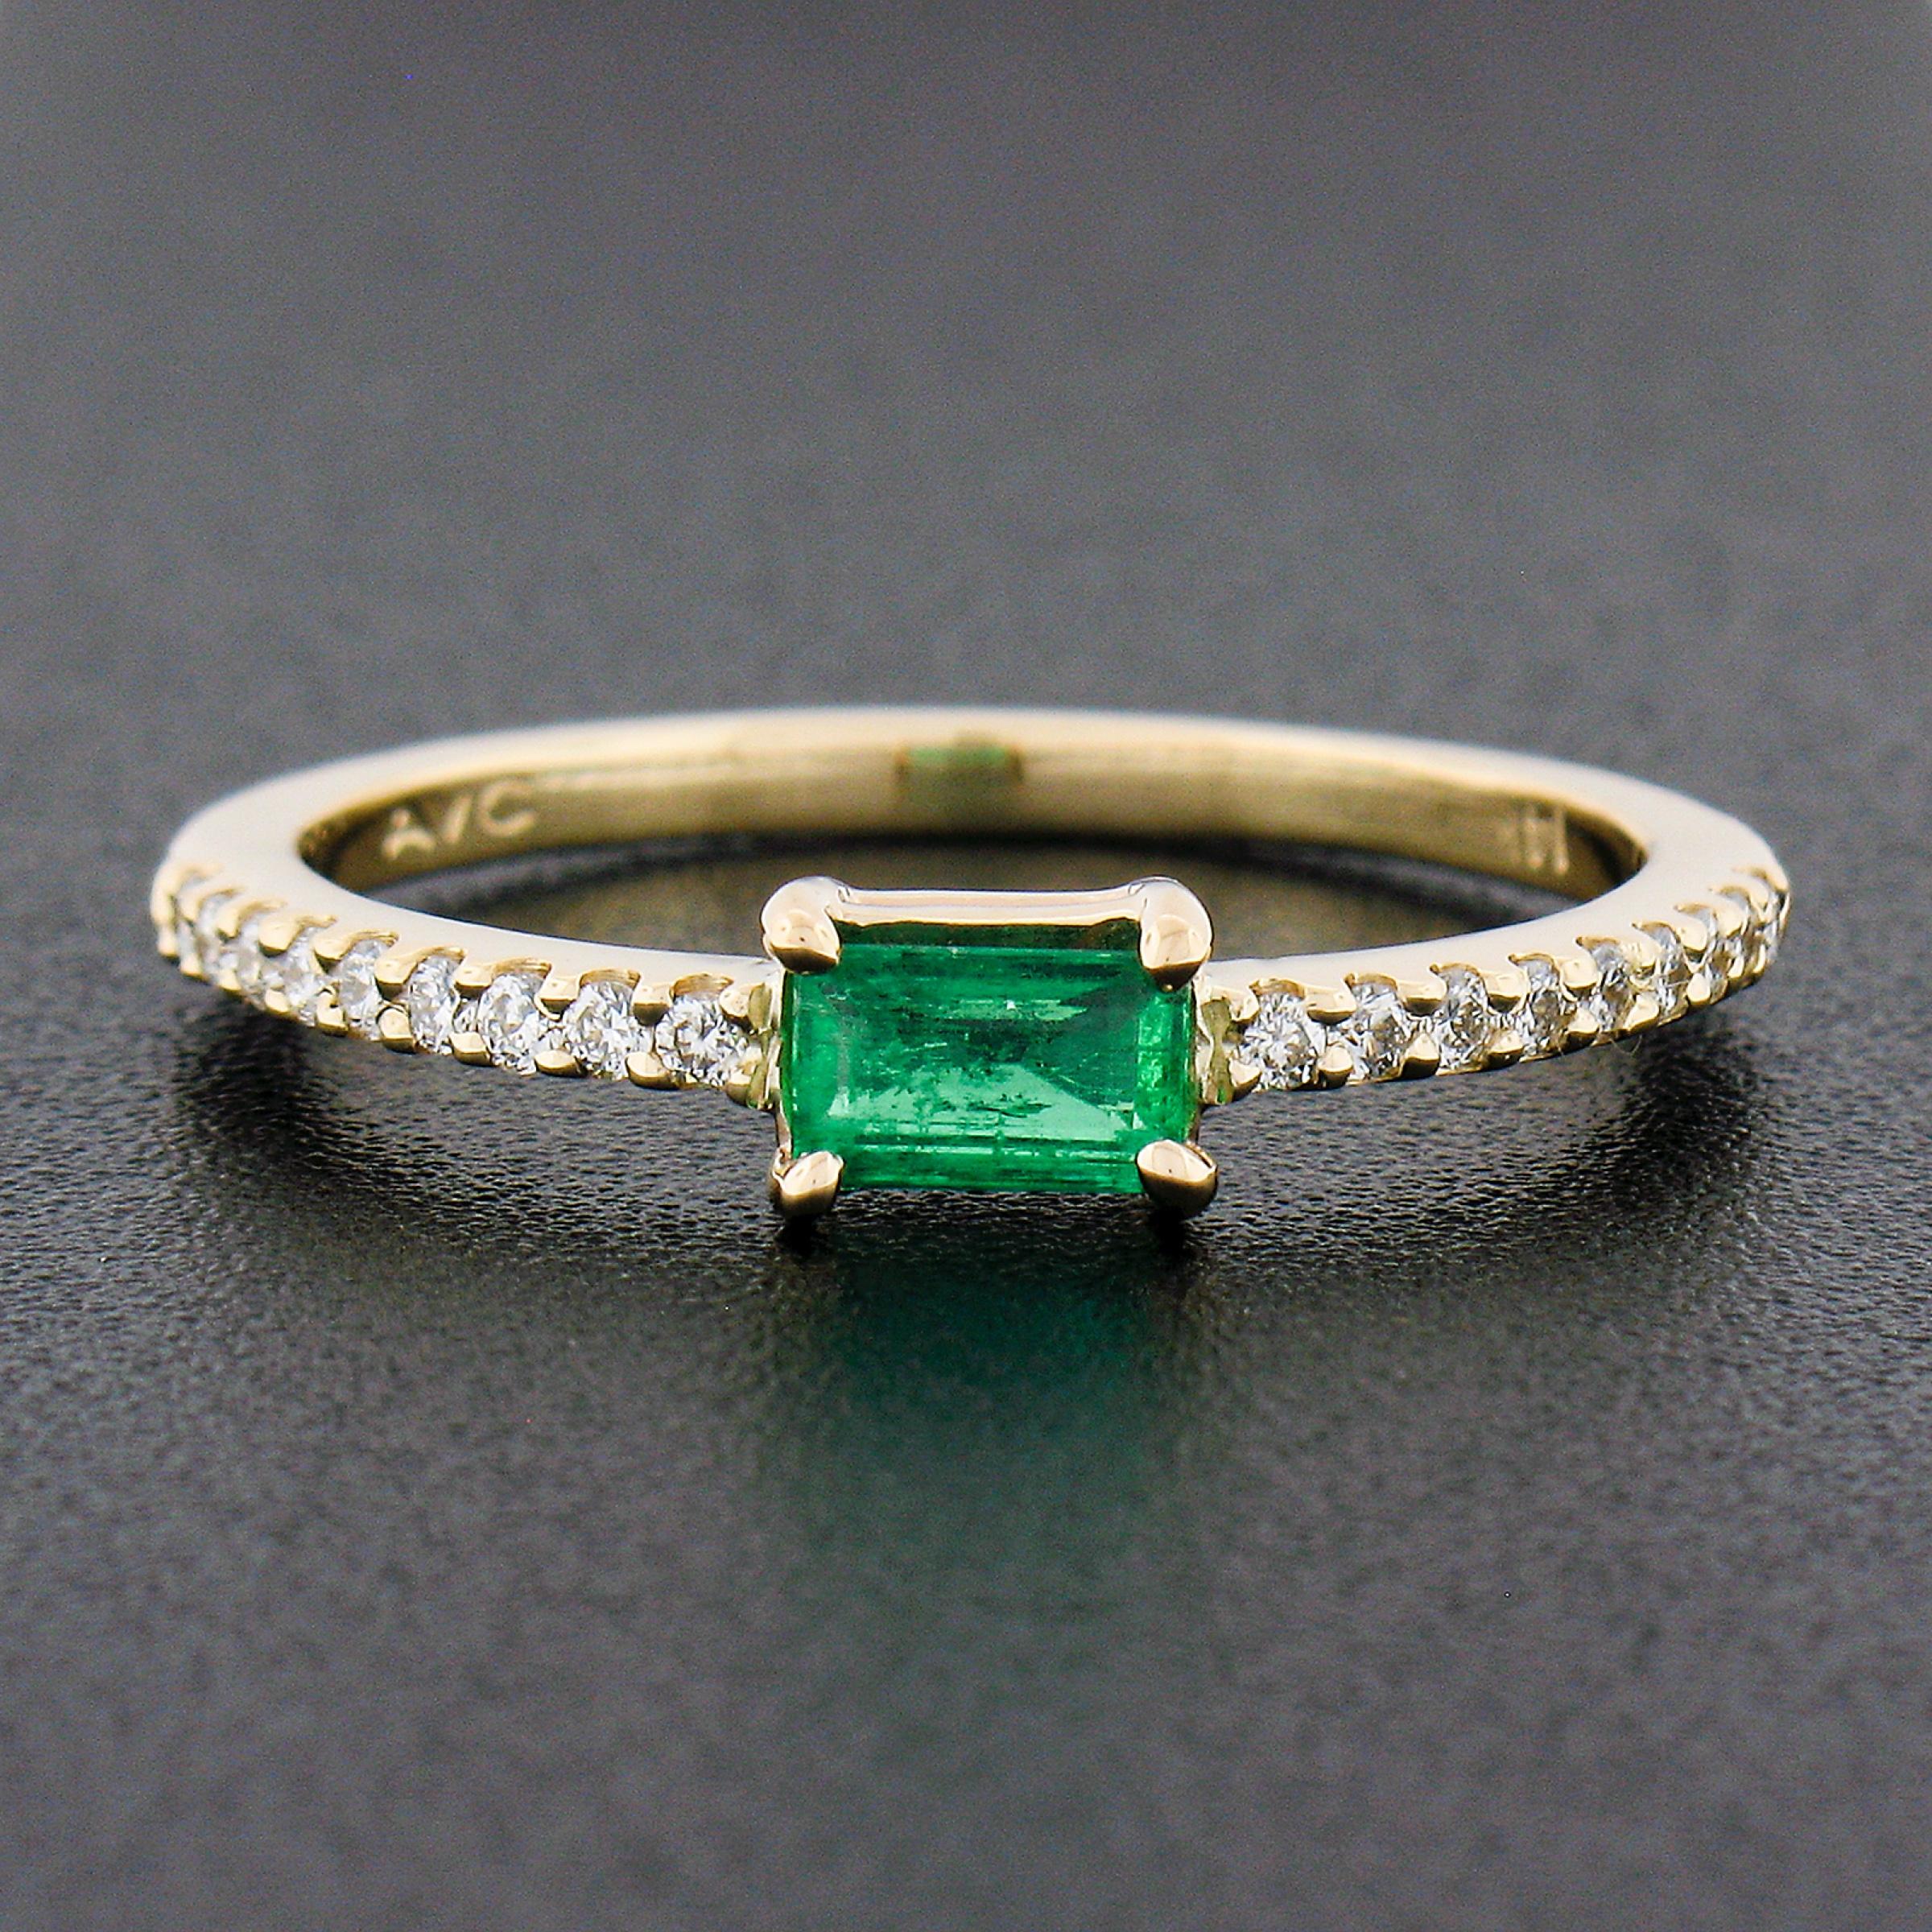 Emerald Cut 14k Yellow Gold 0.51ct Emerald & Diamond Sideways Engagement Stackable Band Ring